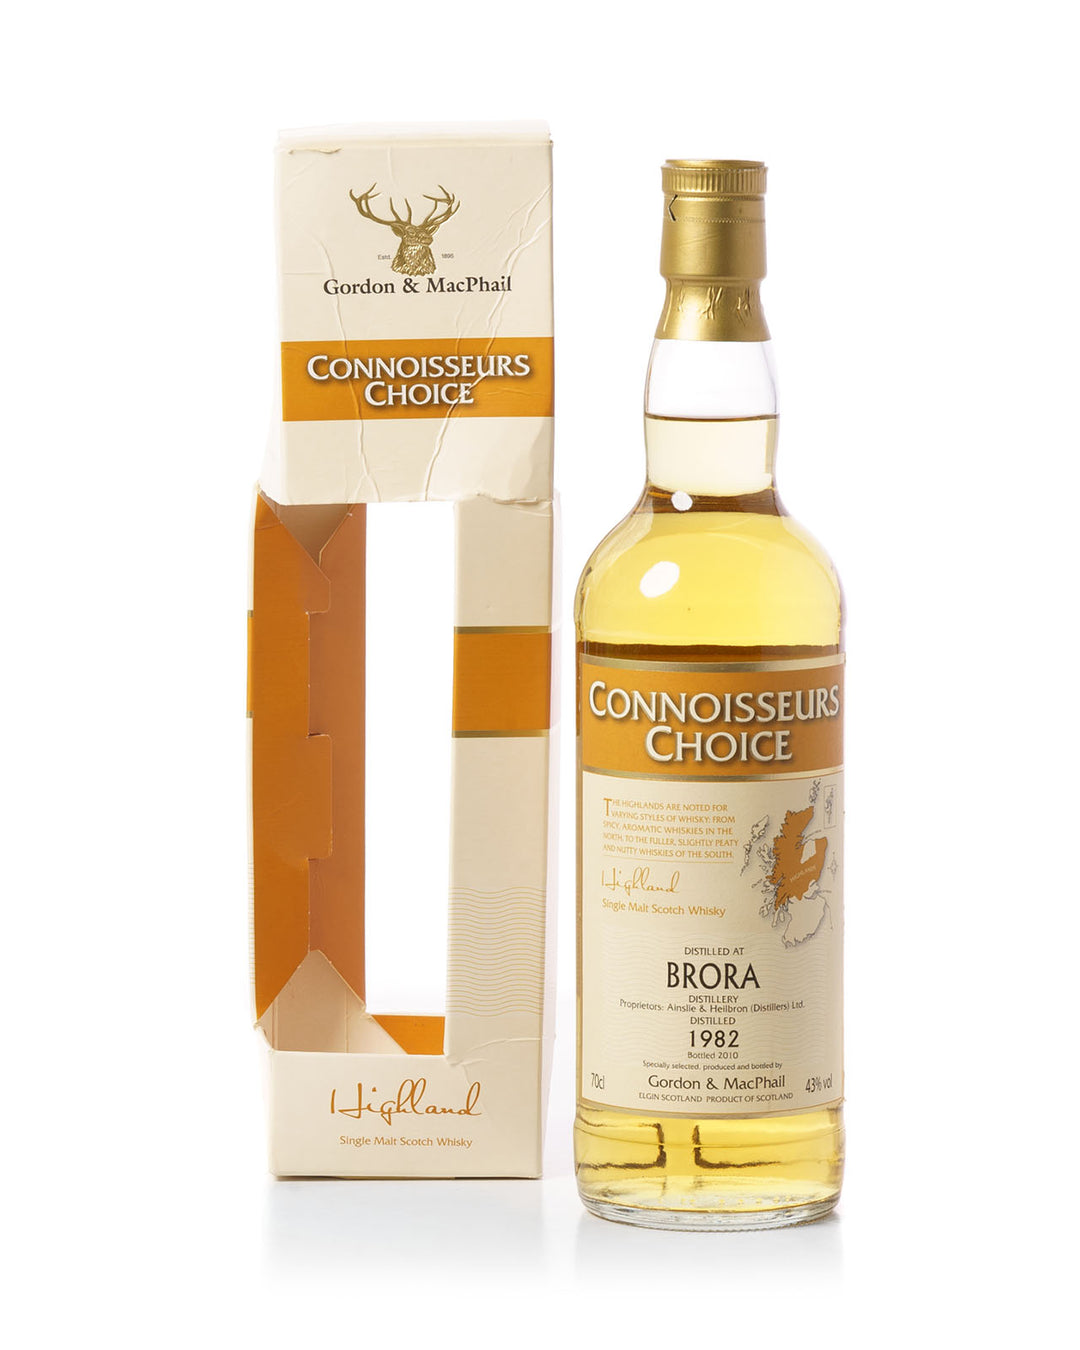 Brora 1982 28 Year Old Connoisseurs Choice Gordon & Macphail Bottled 2010 With Original Box